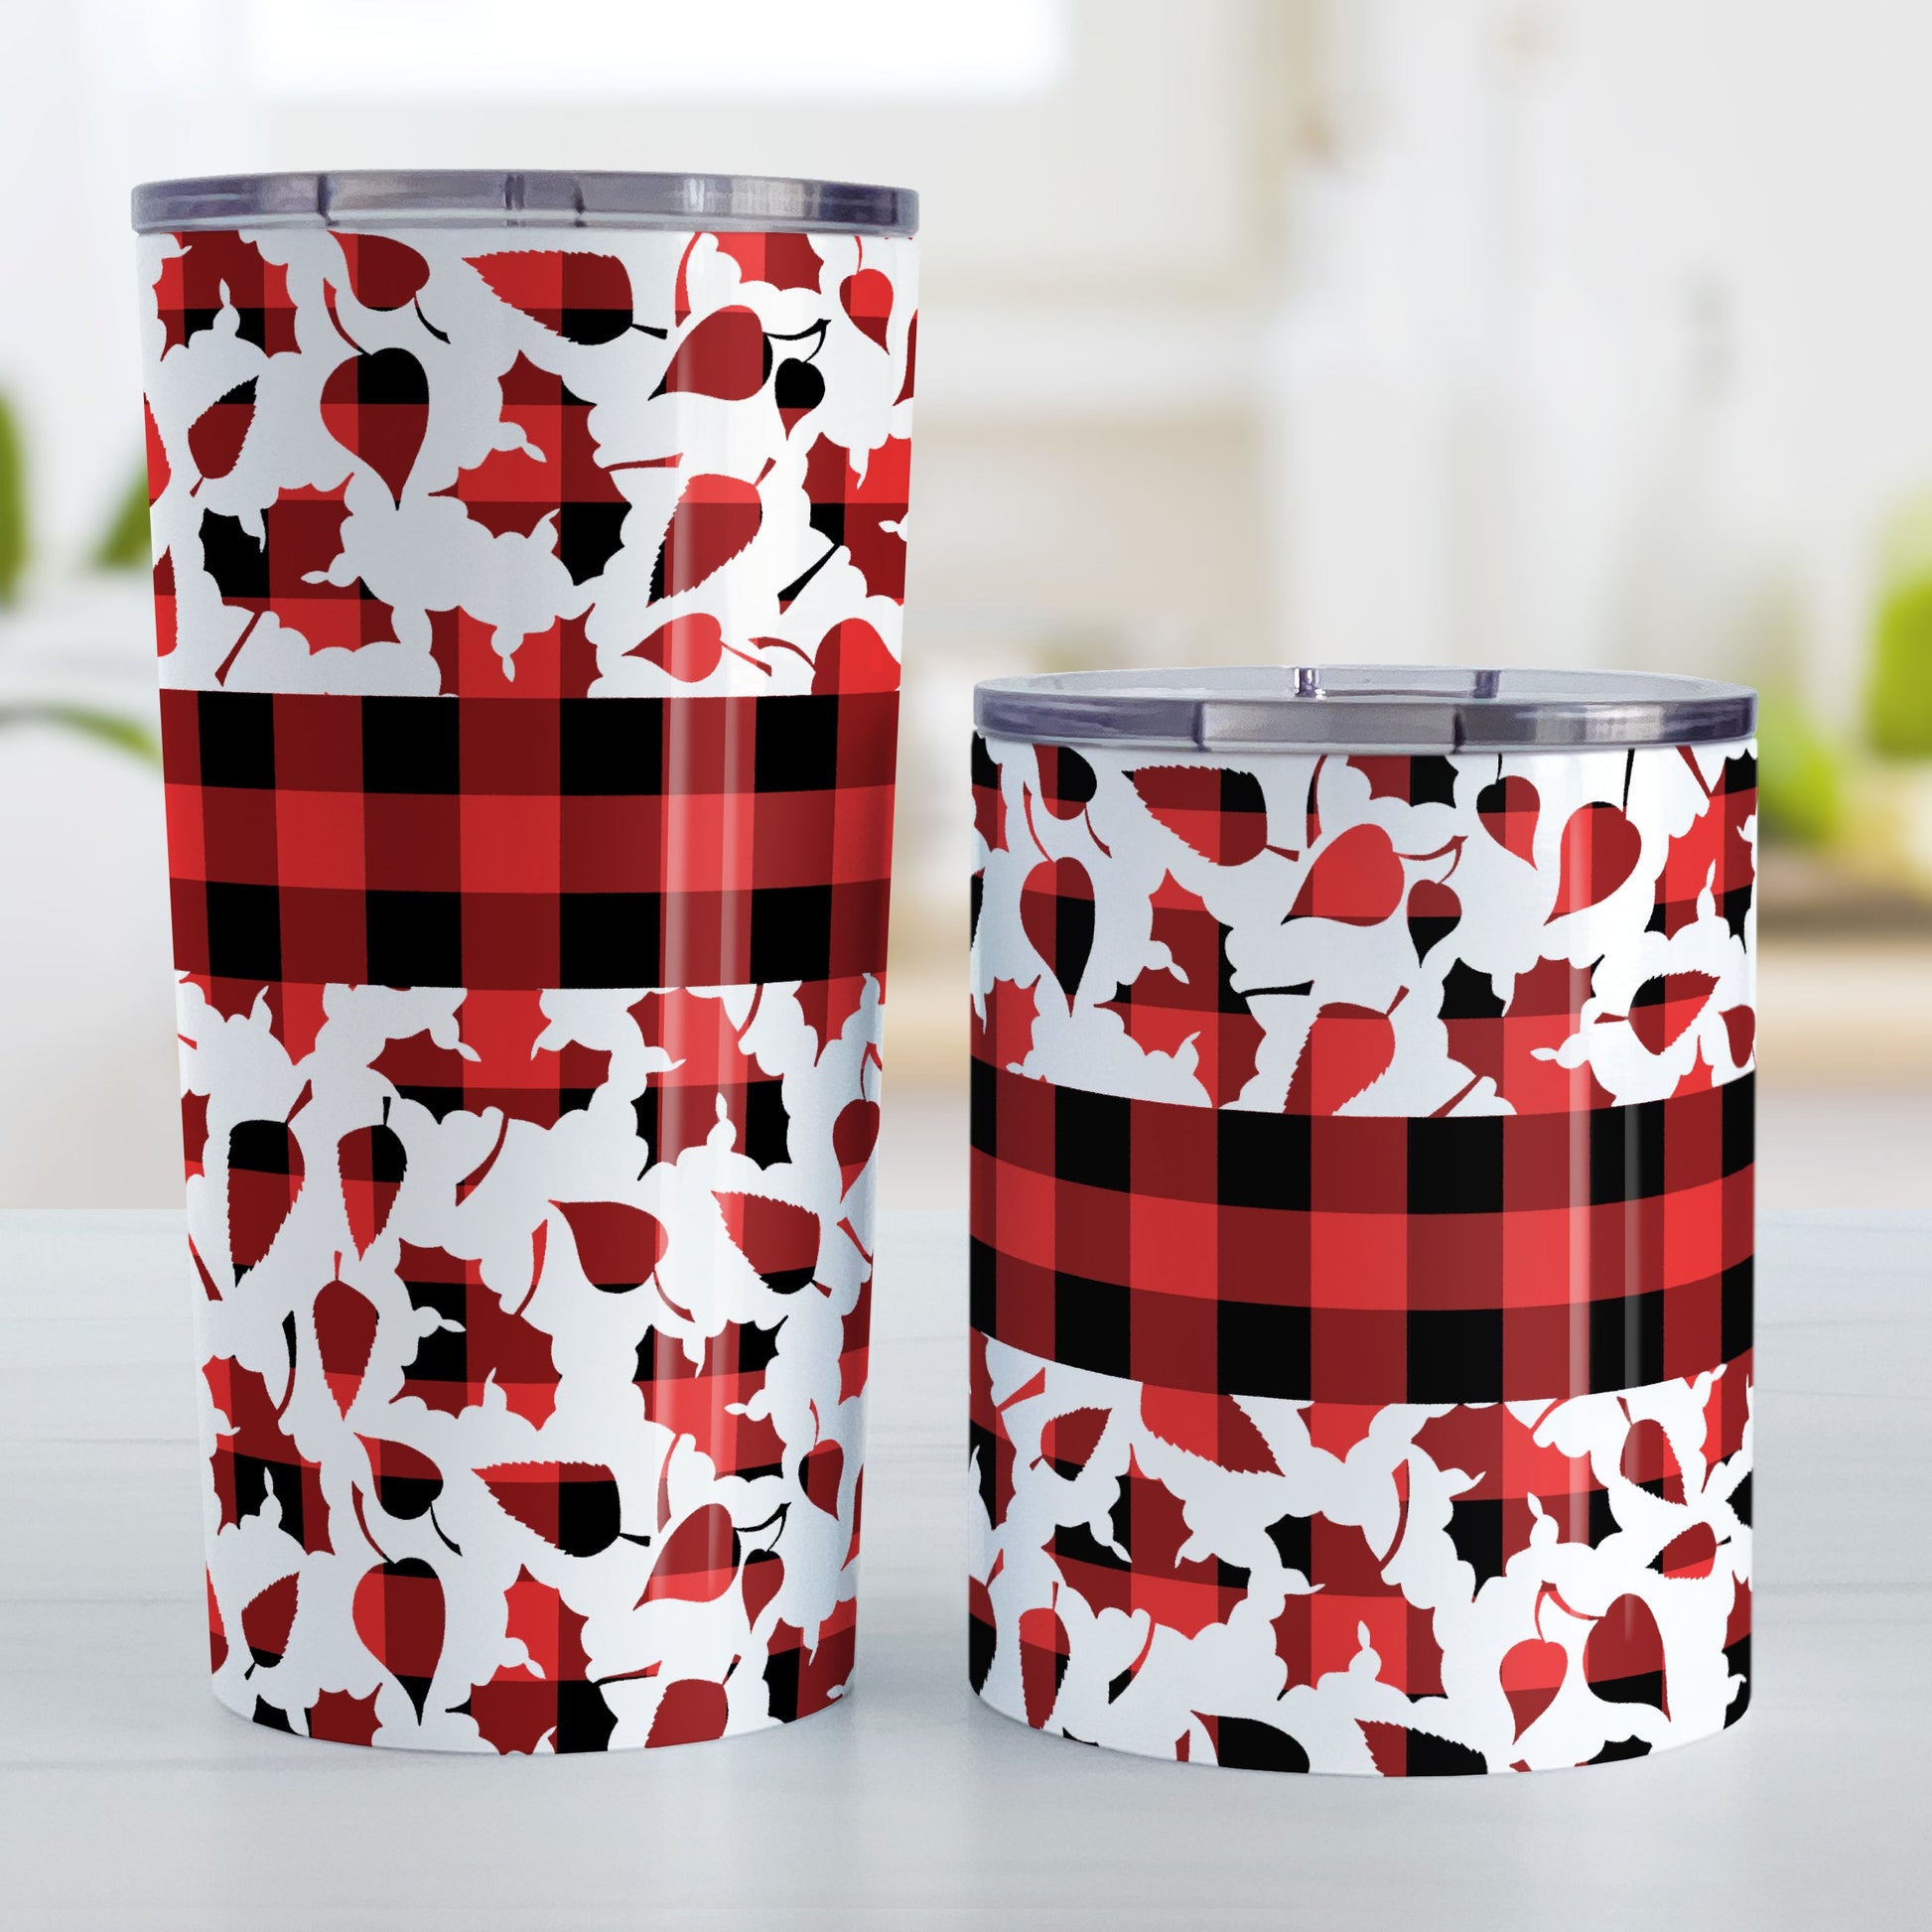 Buffalo Plaid Leaves Fall Tumbler Cup (20oz or 10oz) at Amy's Coffee Mugs. Stainless steel insulated tumbler cups designed with a pattern of leaves with a red and black buffalo plaid pattern that wraps around the cups. There is a buffalo plaid stripe over the middle area of the leaves. Photo shows both sized cups next to each other.